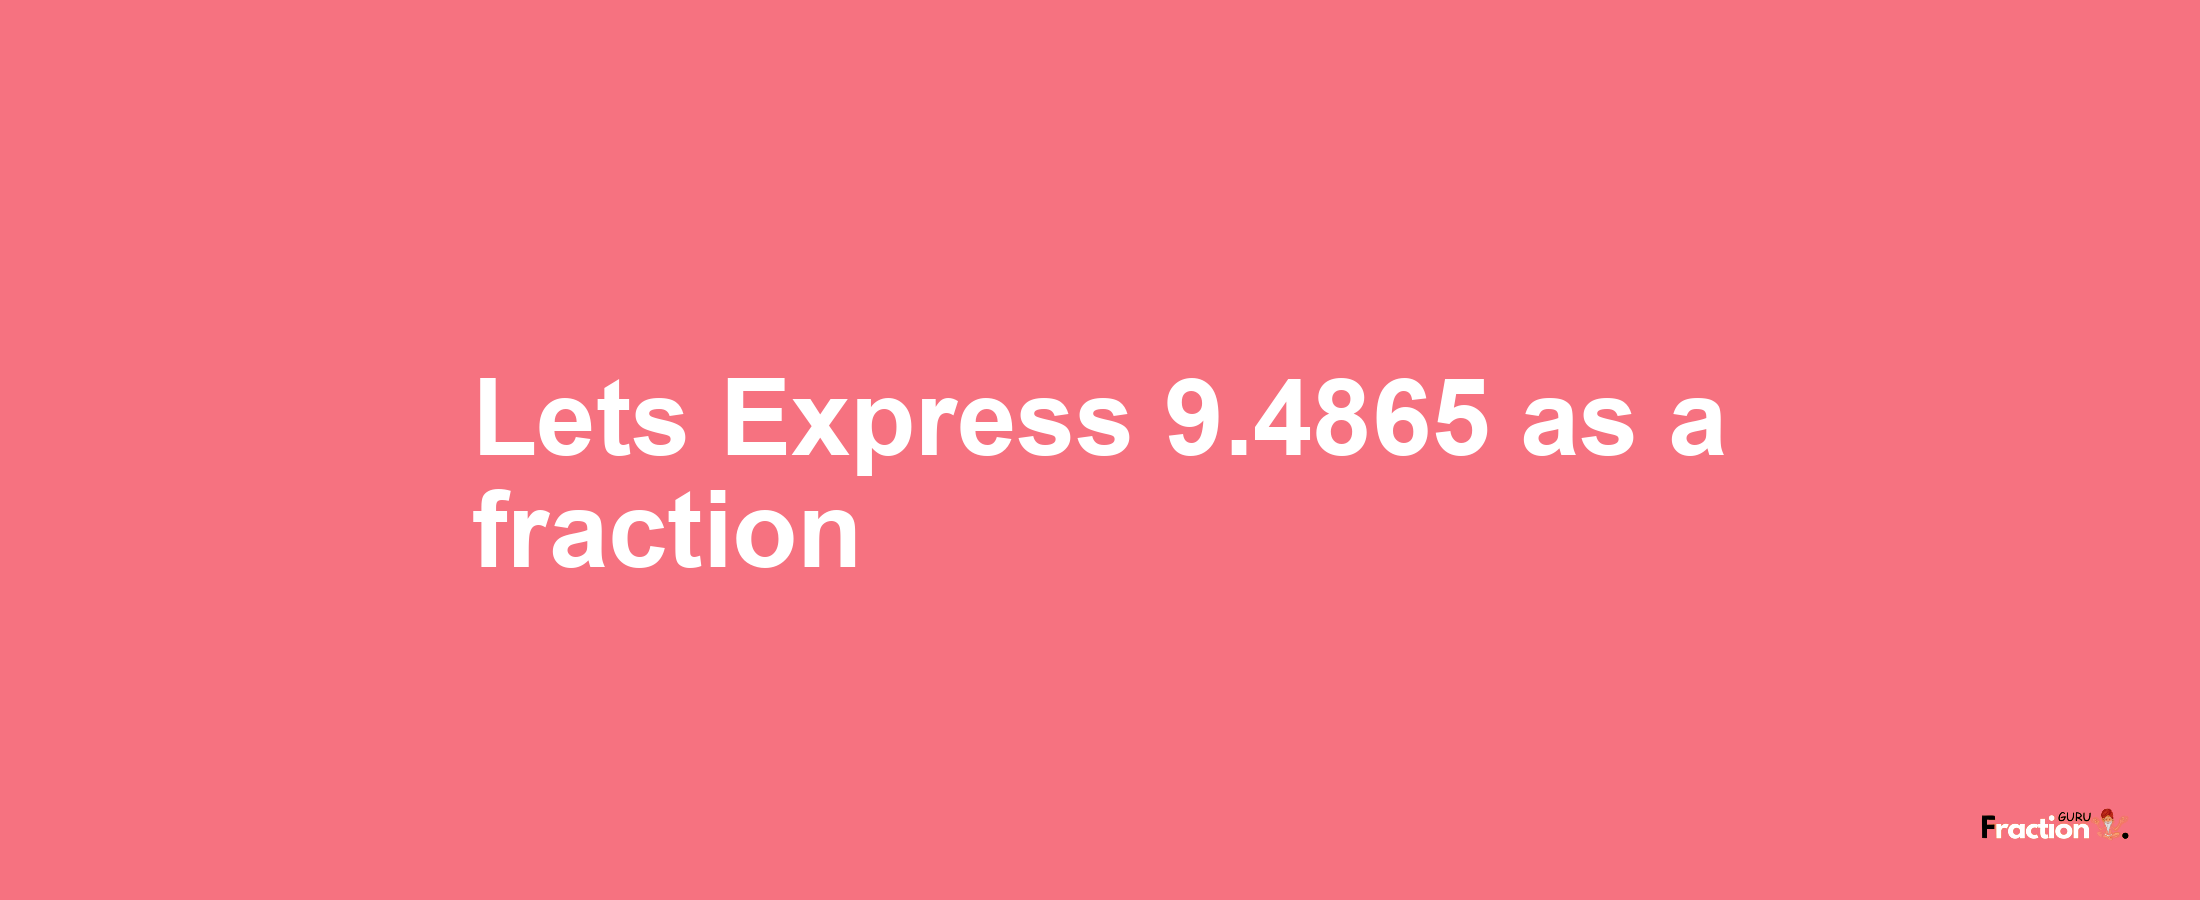 Lets Express 9.4865 as afraction